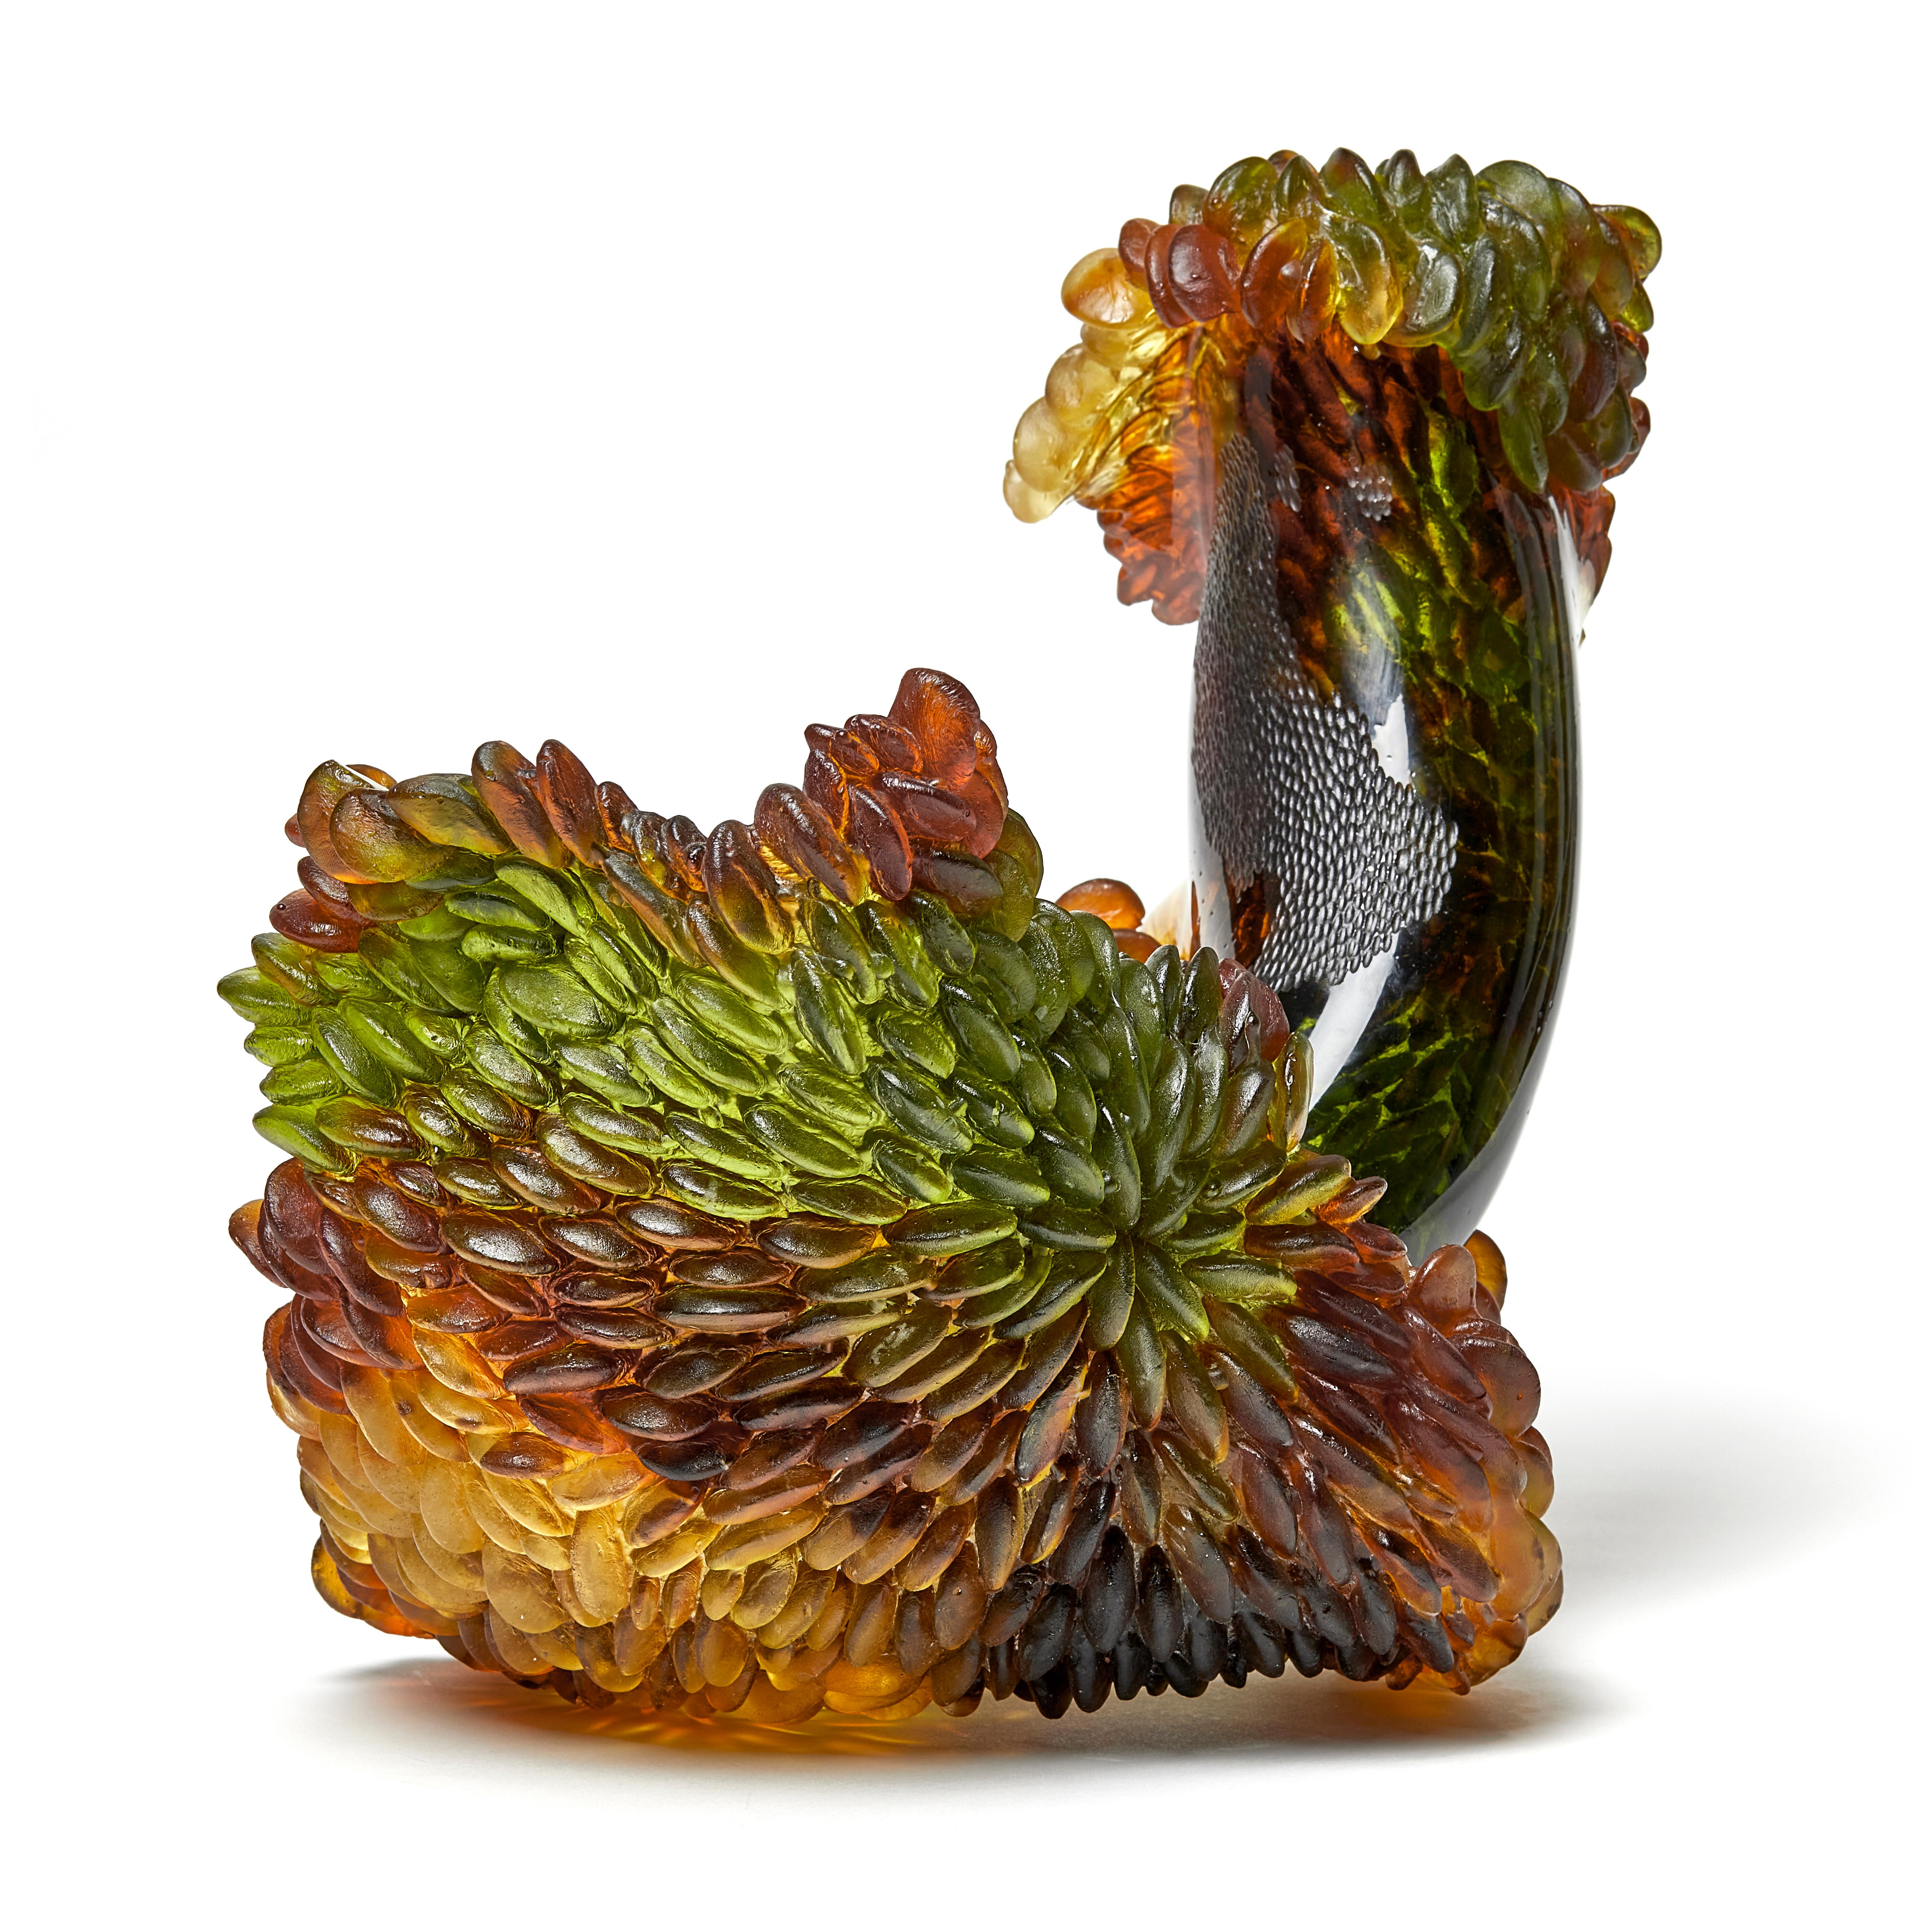 Organic Modern Autumn Cherry, Unique Glass Sculpture in Green and Amber by Nina Casson McGarva